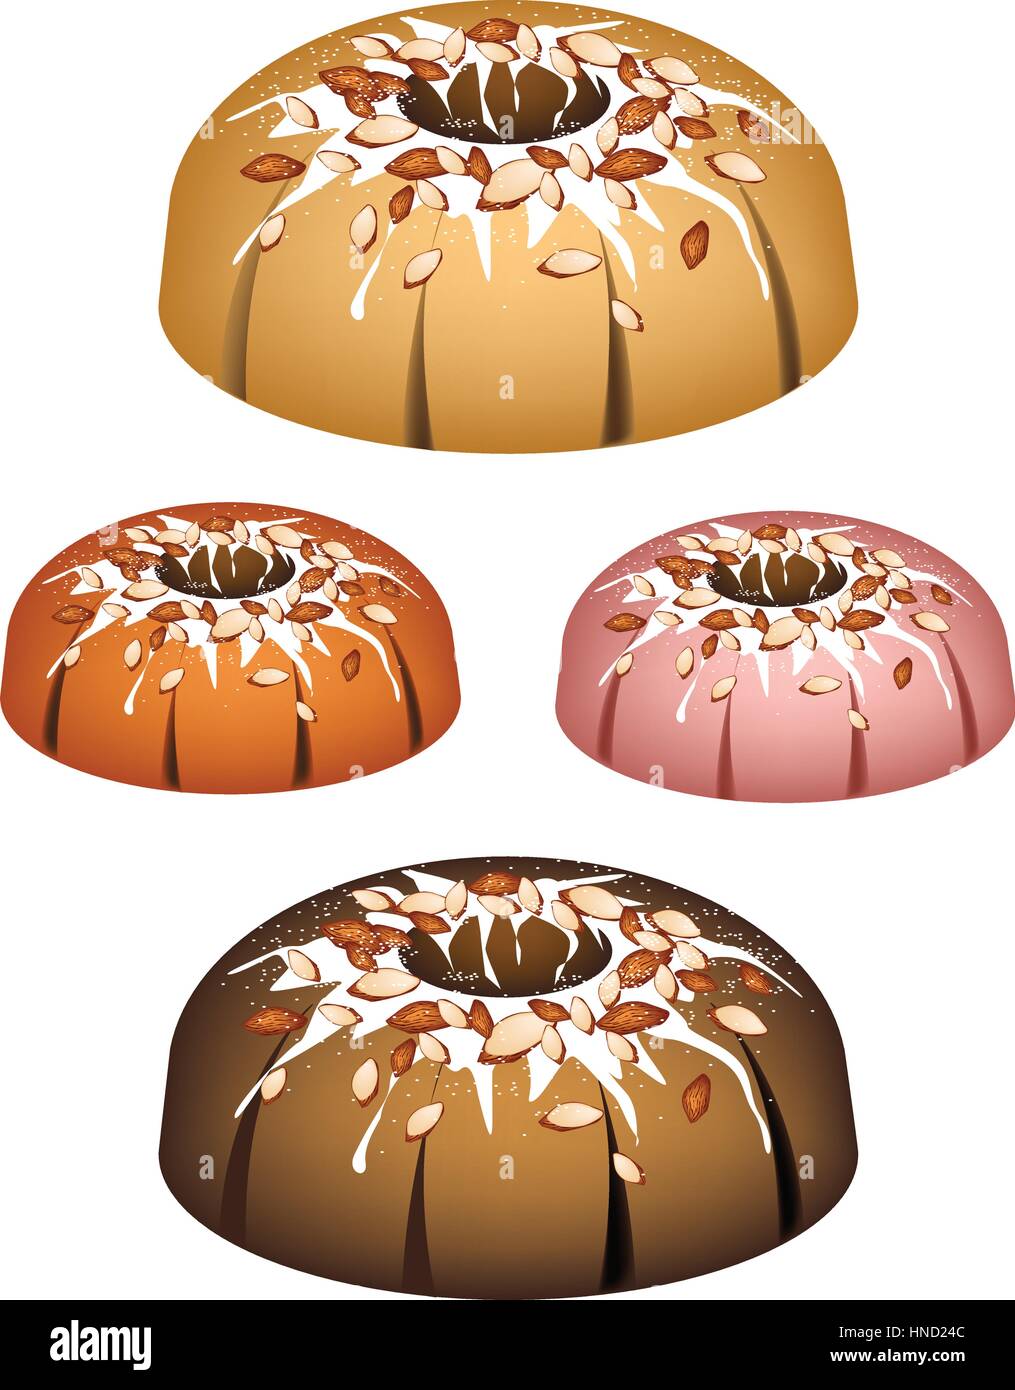 Illustration Set of Bundt Cake or Traditional Big Round Cake with Hole Inside, Mirror Glaze Coating and Almonds for Holiday Dessert Isolated on White  Stock Vector